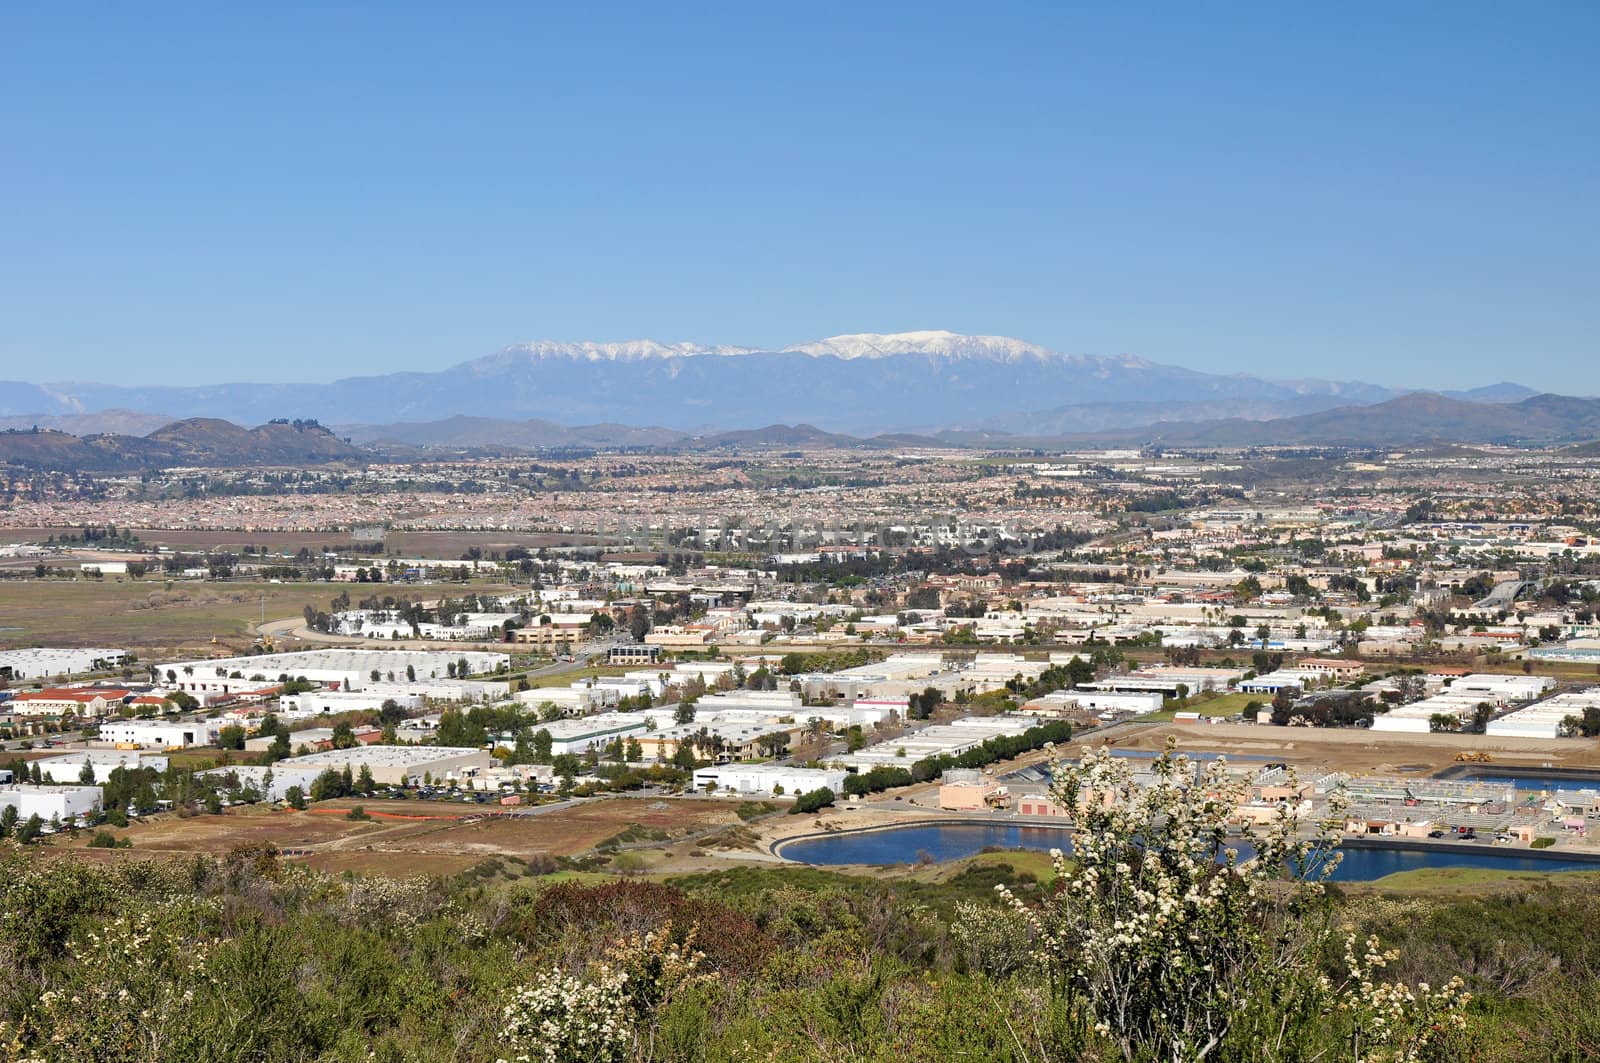 Looking over the town of Murrieta, California from a nearby hilltop.